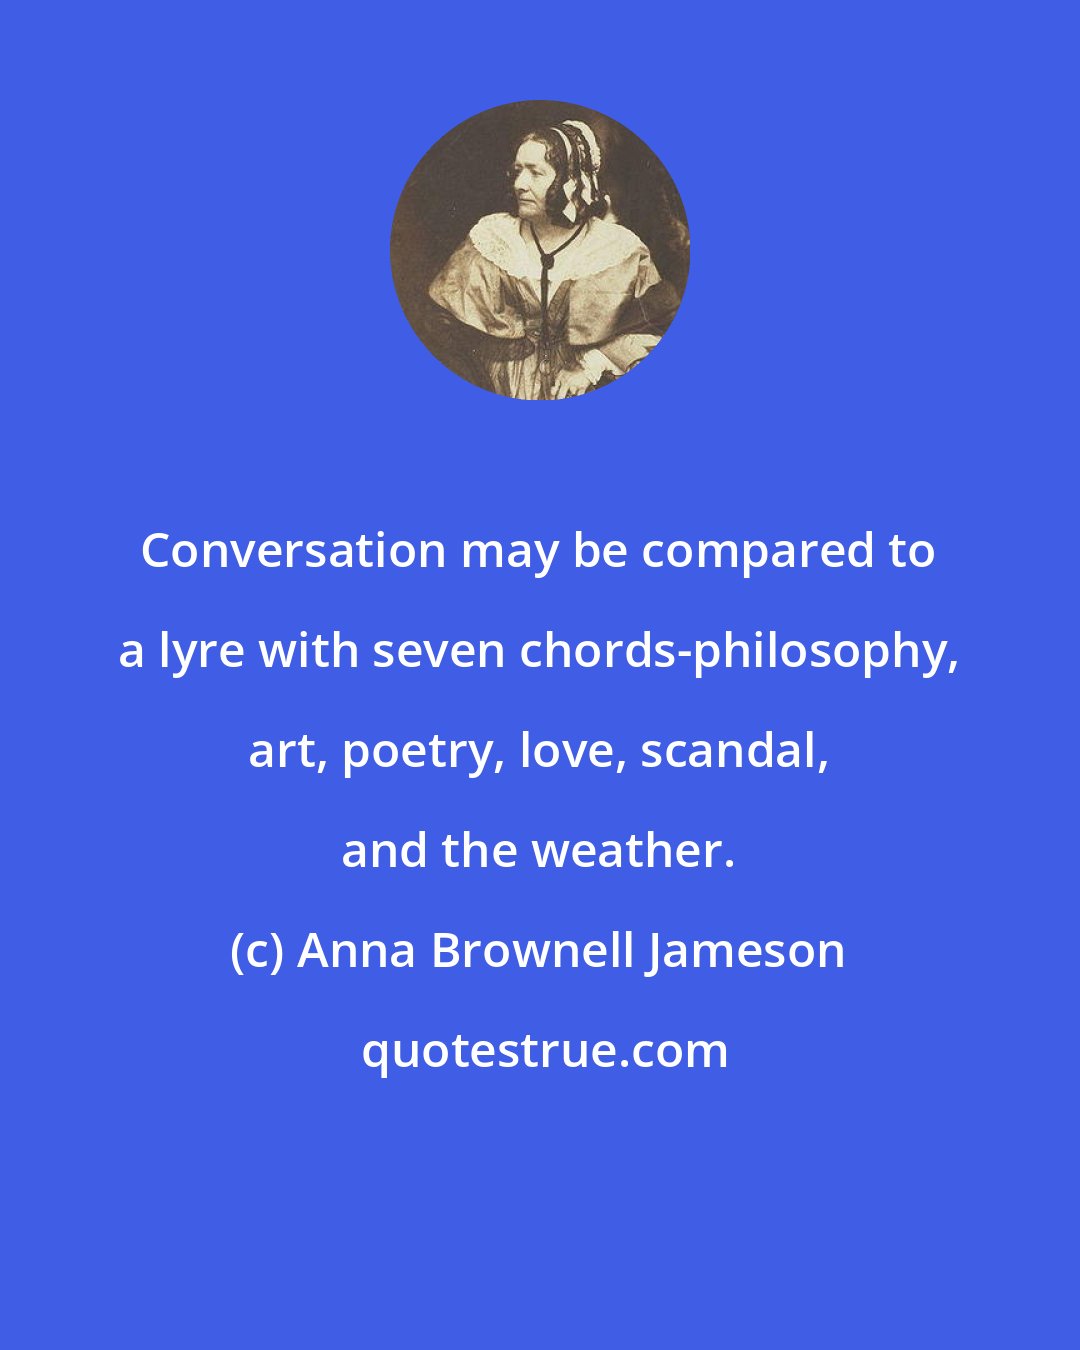 Anna Brownell Jameson: Conversation may be compared to a lyre with seven chords-philosophy, art, poetry, love, scandal, and the weather.